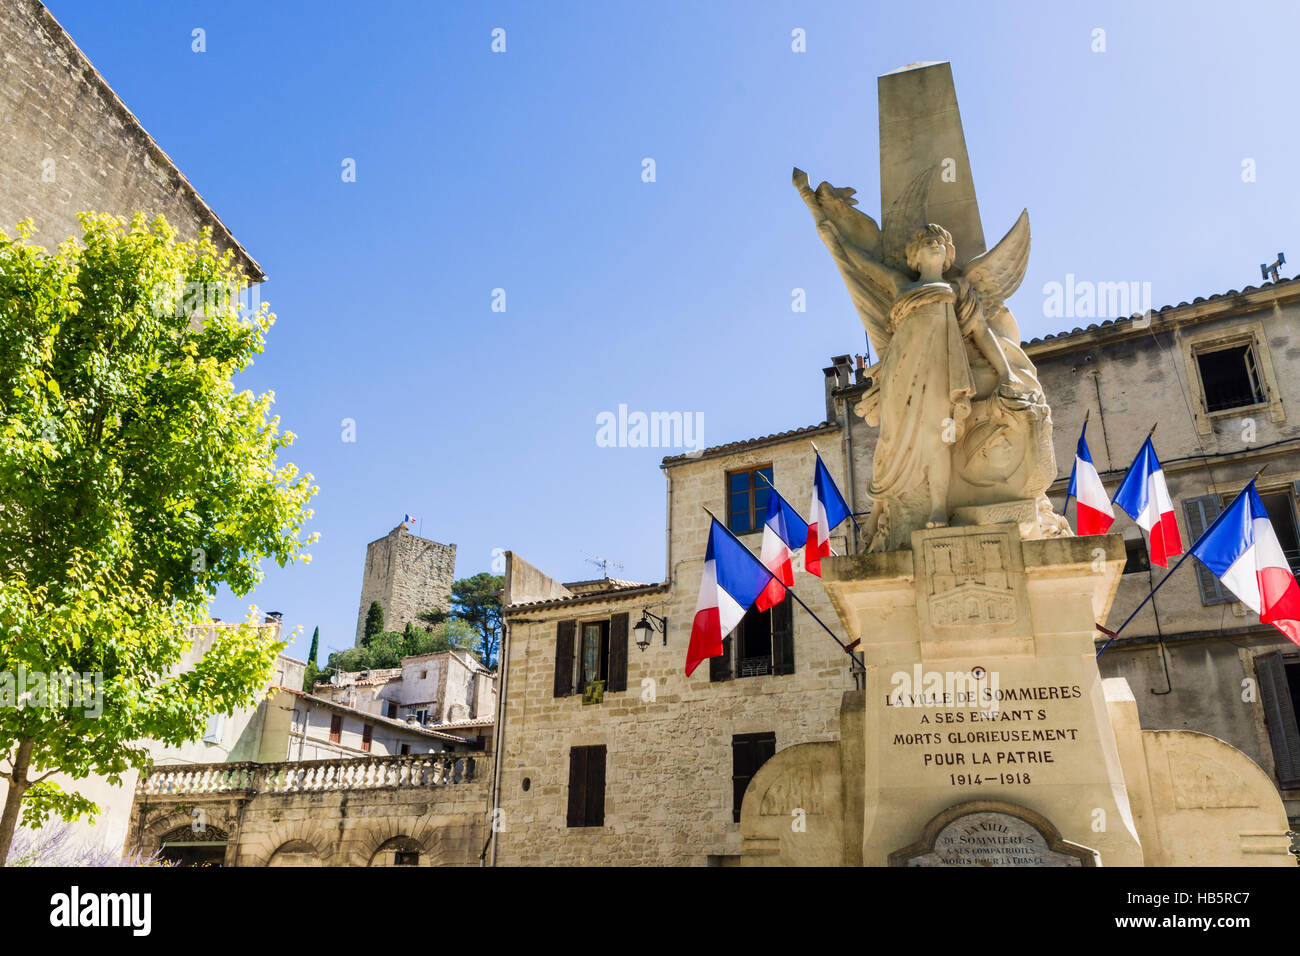 Monument to locals who died in both wars, Sommières, Gard, France Stock Photo